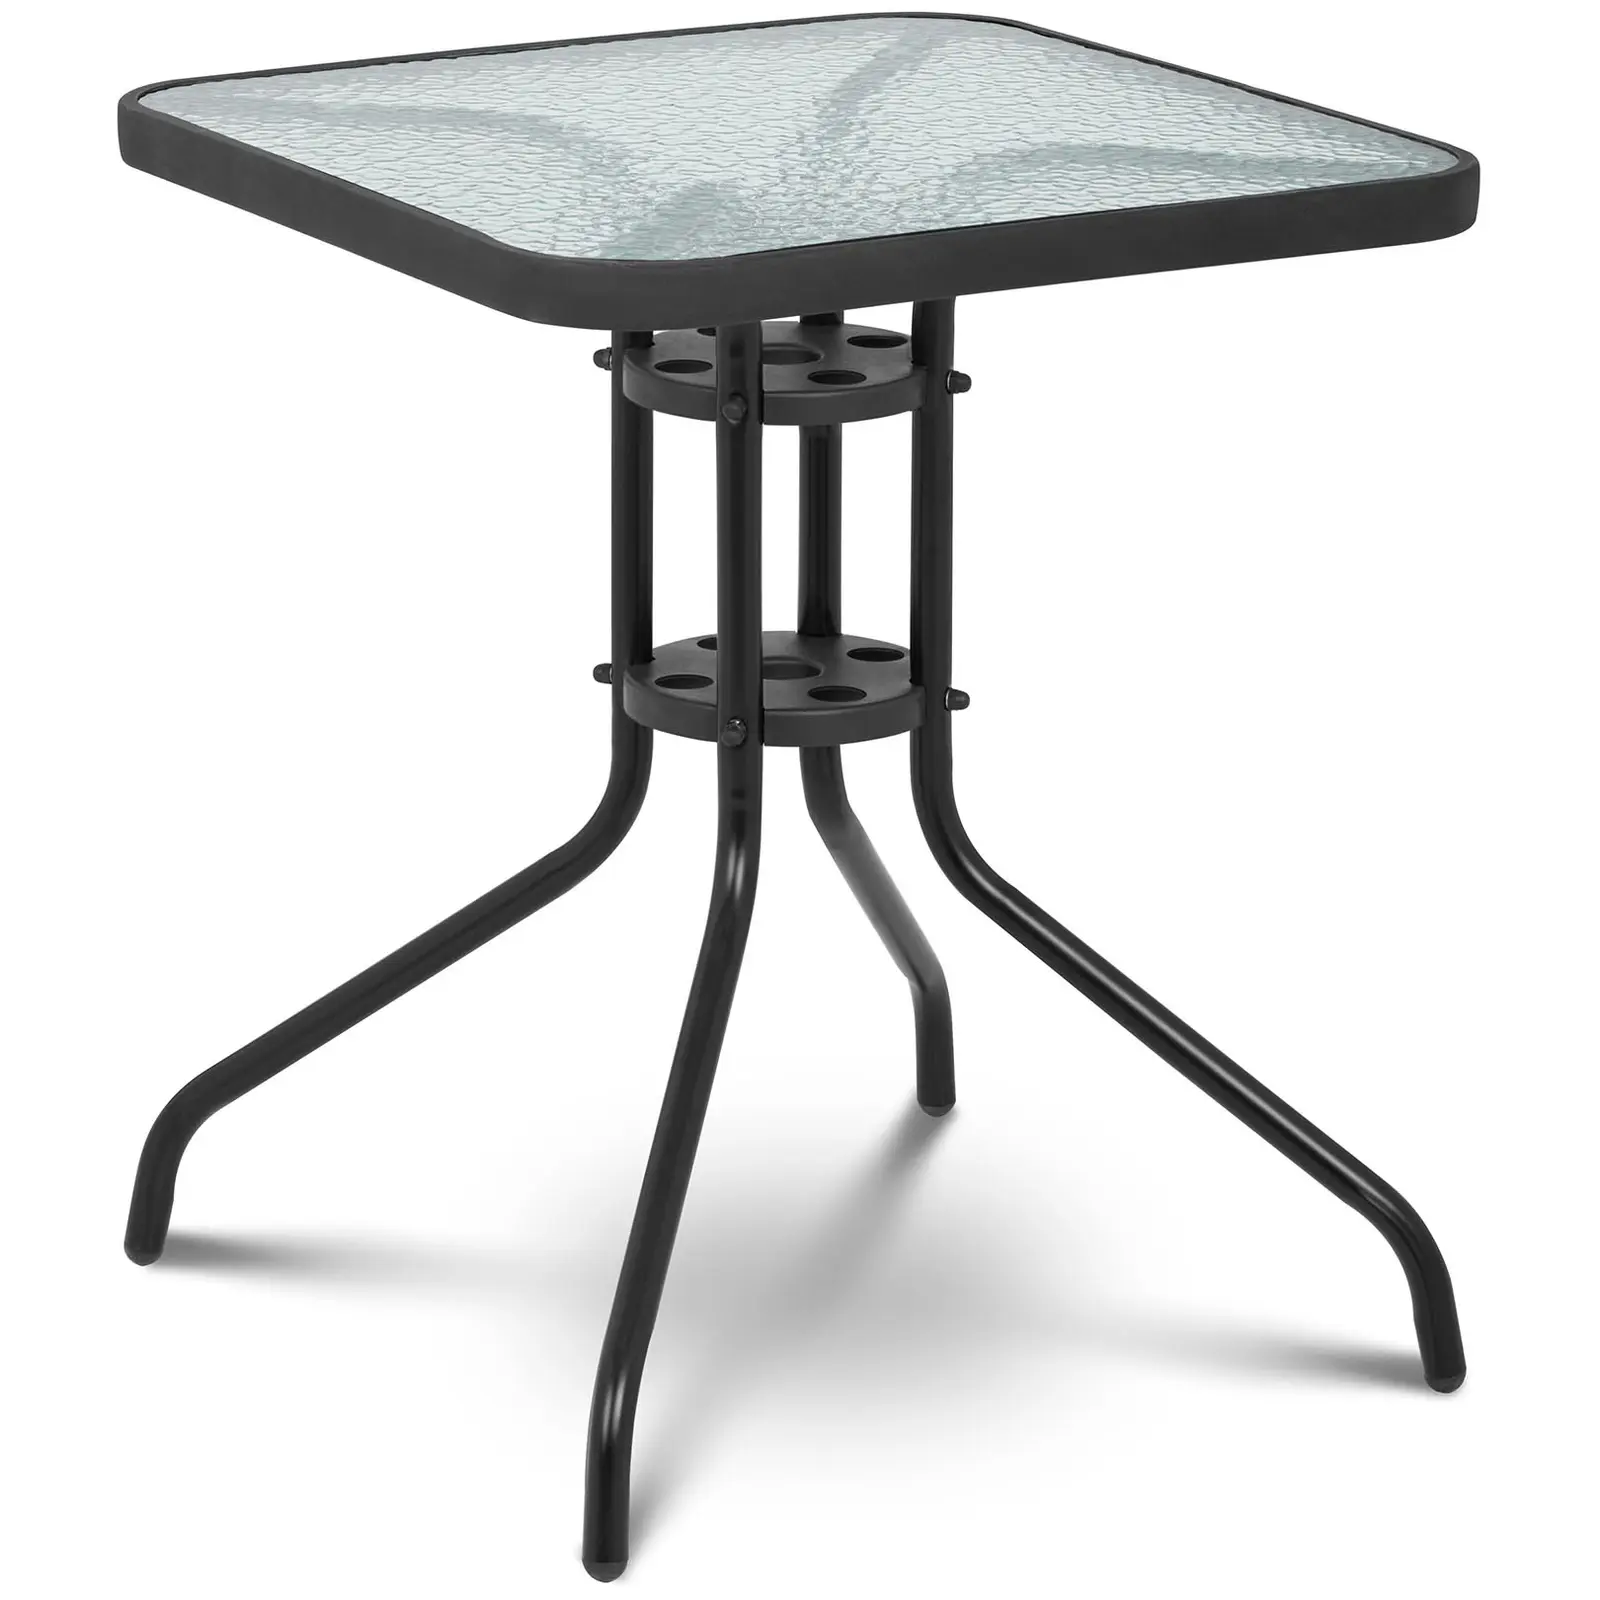 Glass Outdoor Table - 60 x 60 cm - glass top - black